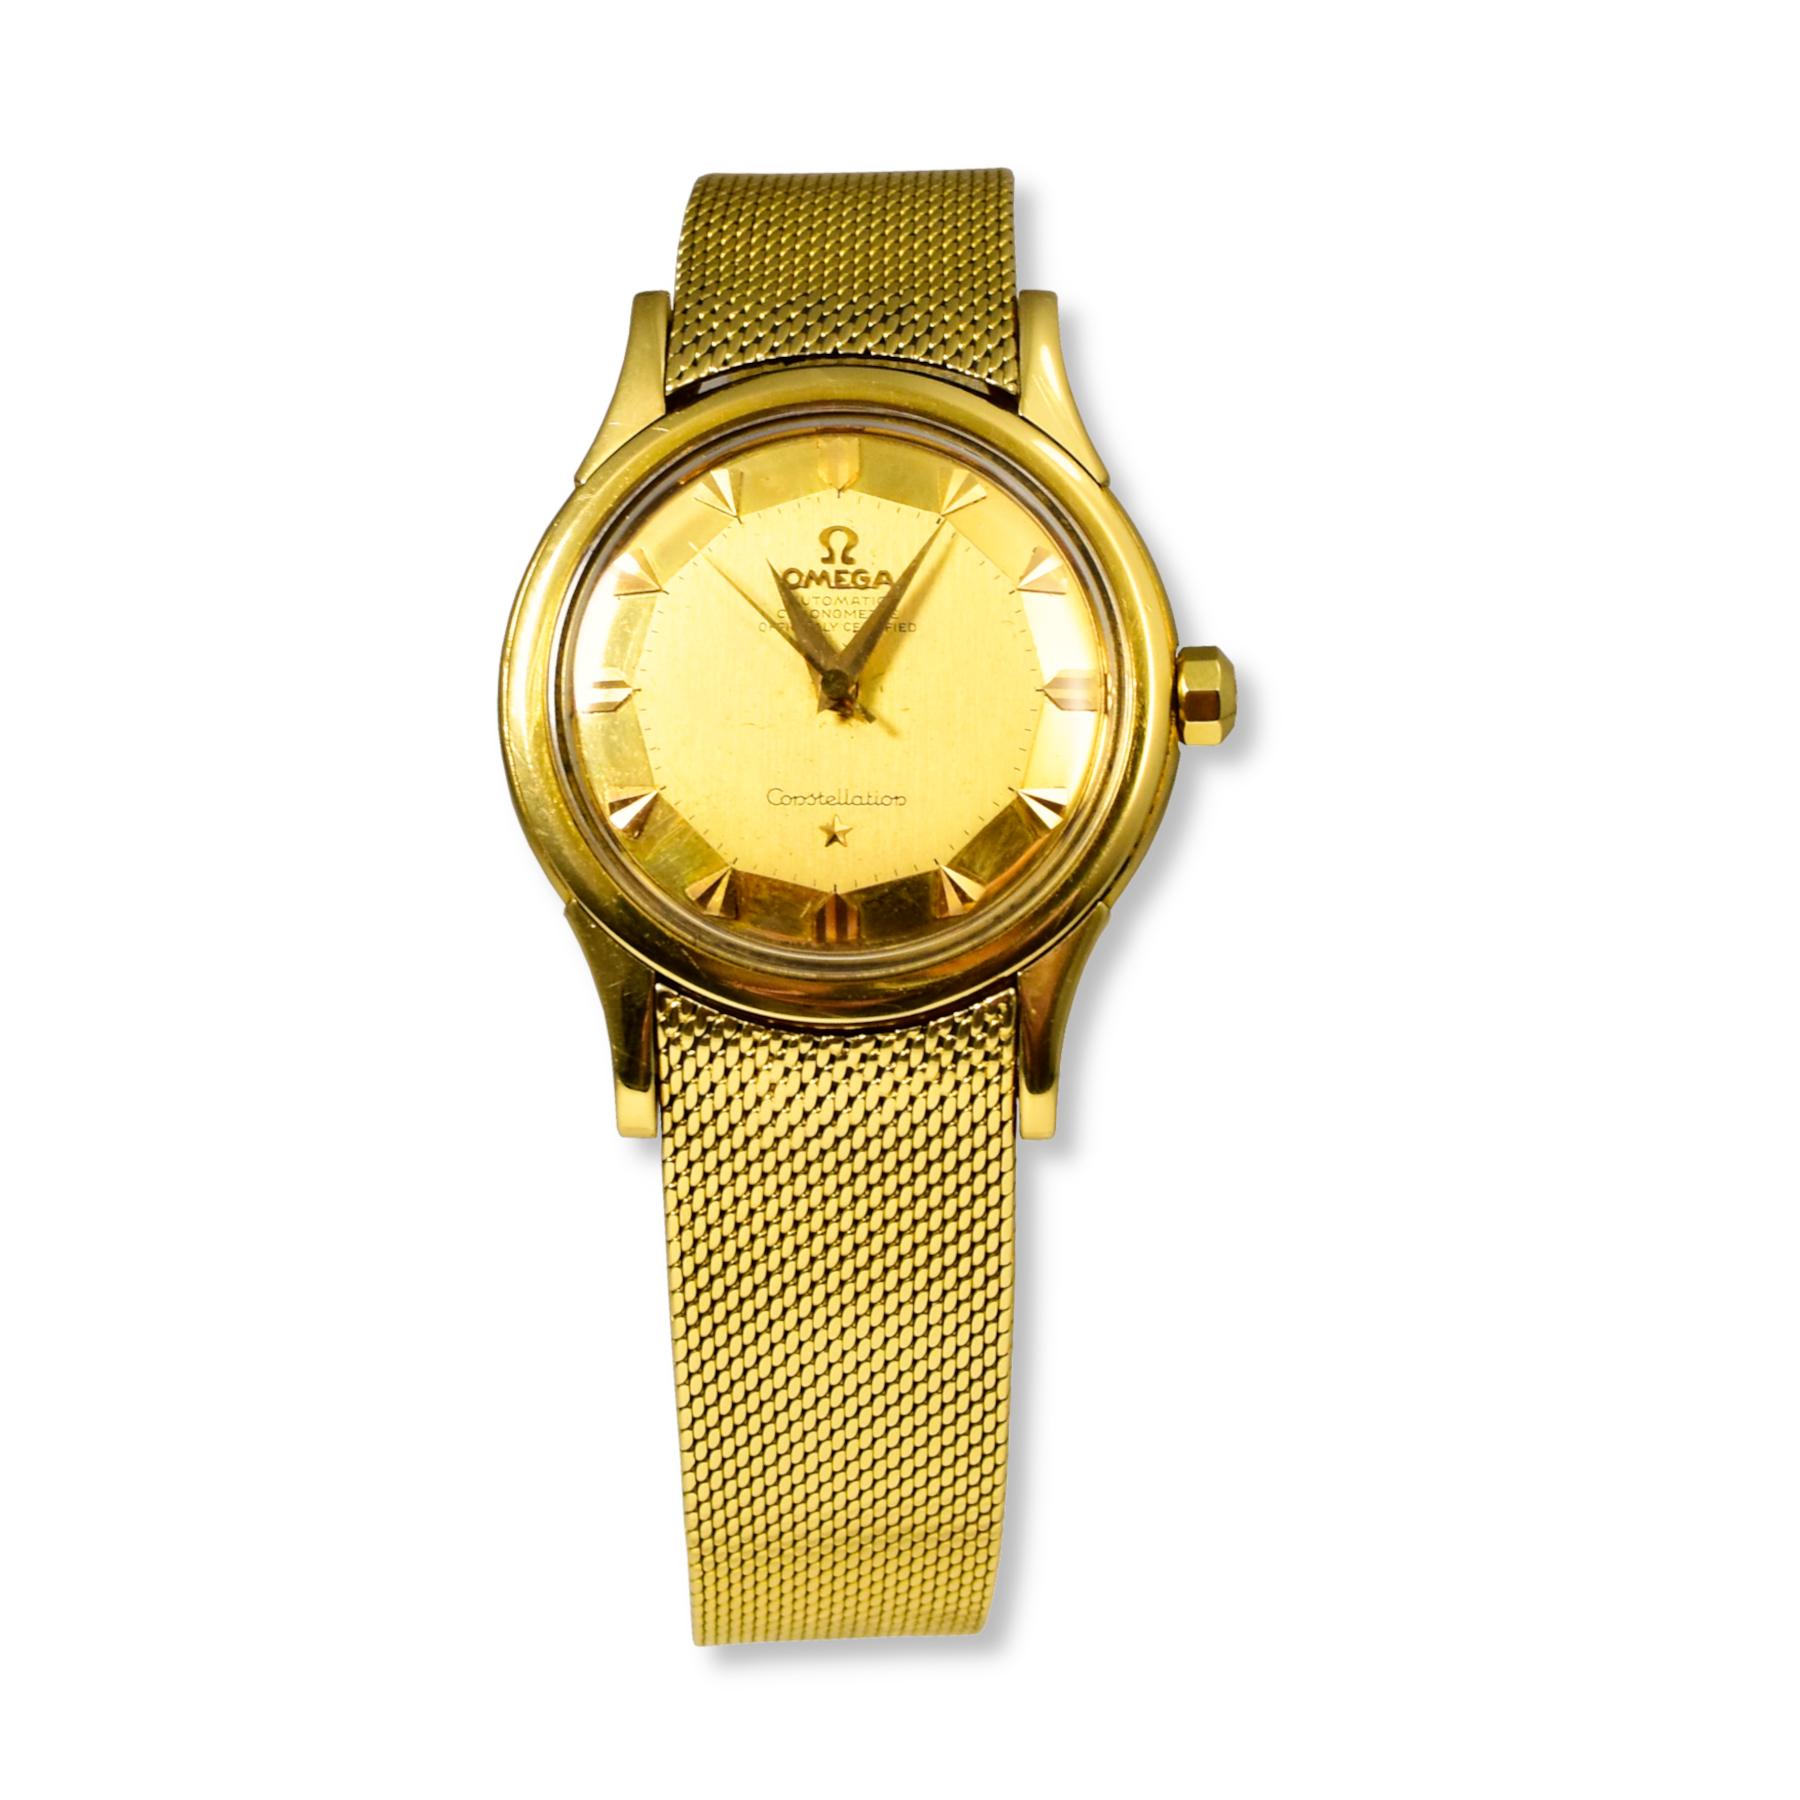 Brand: Omega
Model: Constellation
Ref: 168.005
Case Shape:  Round
Case Diameter: 34 mm
Dial Color: Gold
Movement: Automatic
Case Material: 18k Yellow Gold
Bracelet Material: Milanese Mesh Bracelet; 18k Yellow Gold
Functions: Date, Hour, Minute,